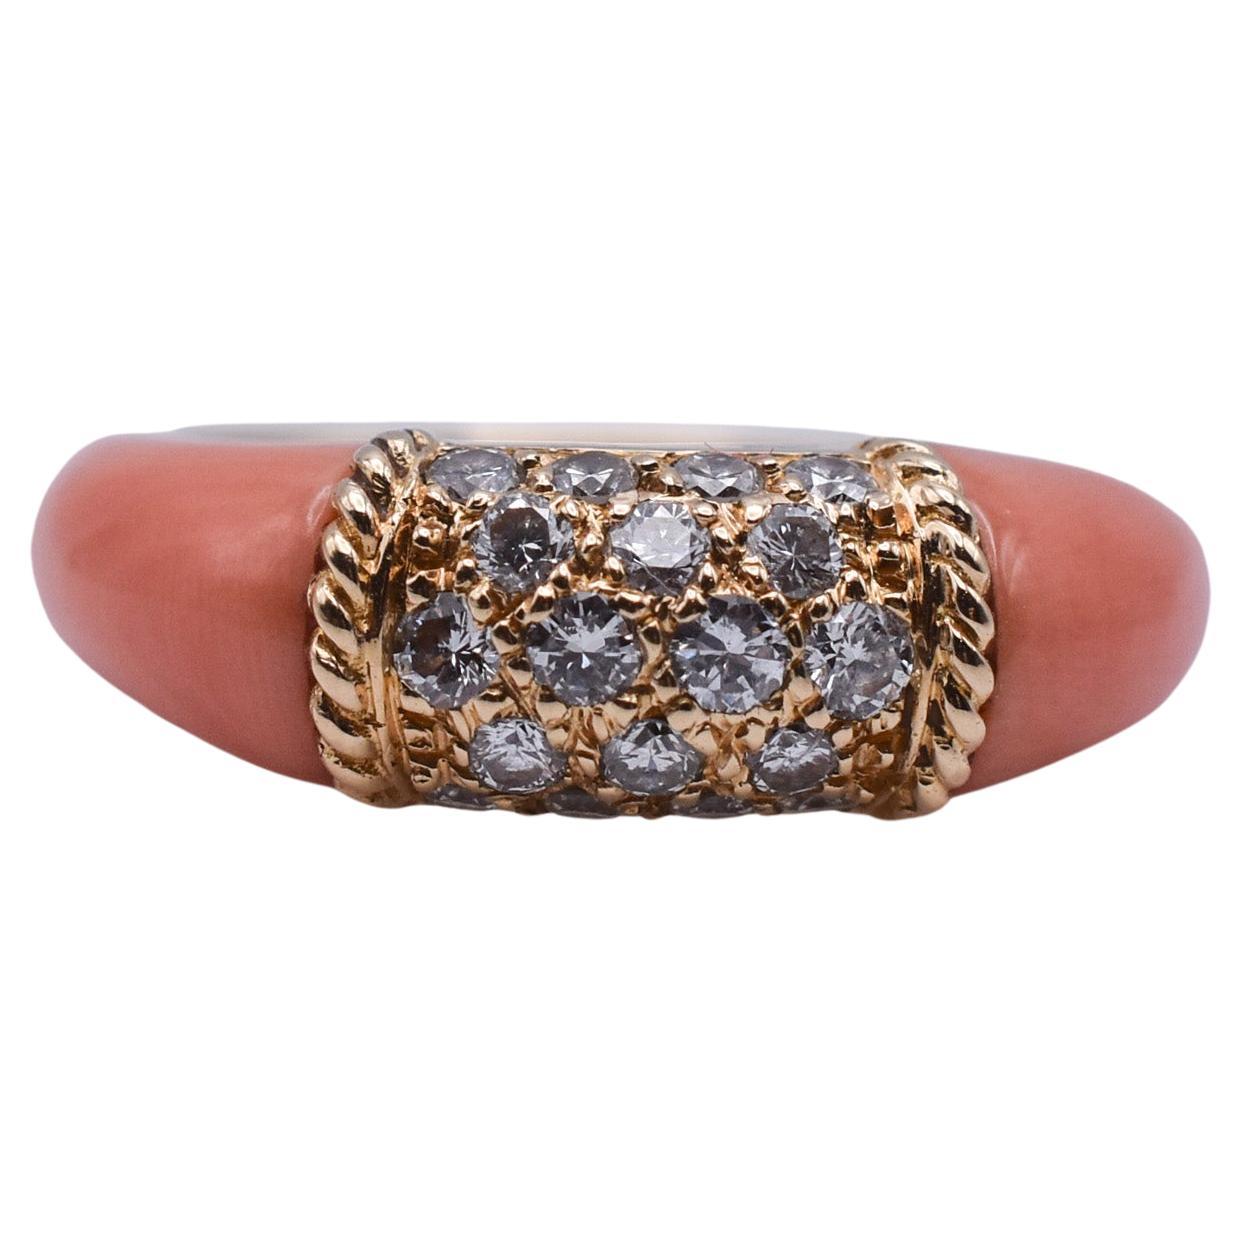 Van Cleef & Arpels Coral and Diamond "Philippine" Ring